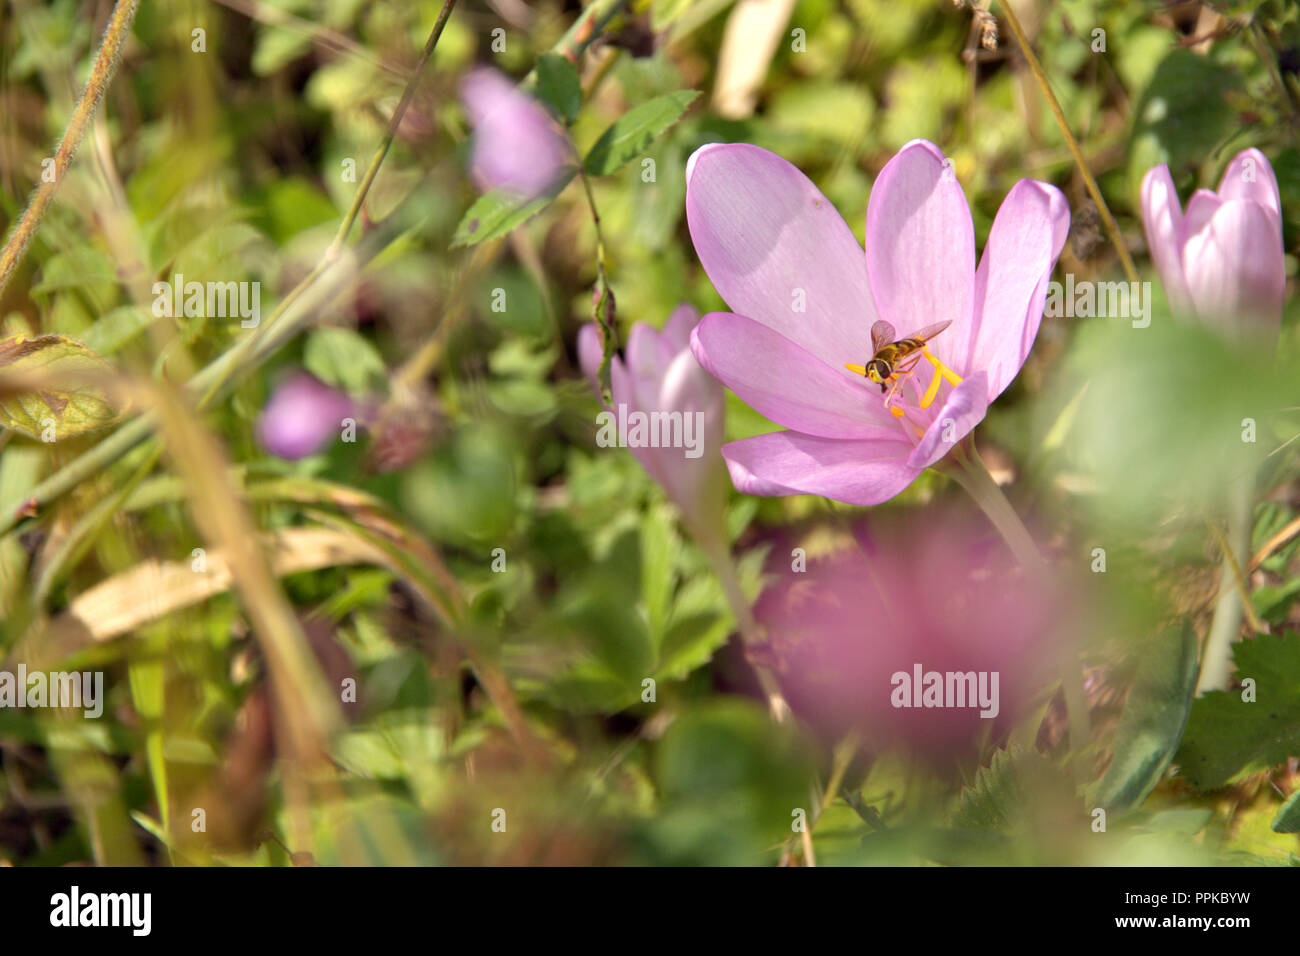 Macro focused meadow saffron crocus, wild flowers with green leaf and blurred background, beautiful petals pink colored with insect on her Stock Photo